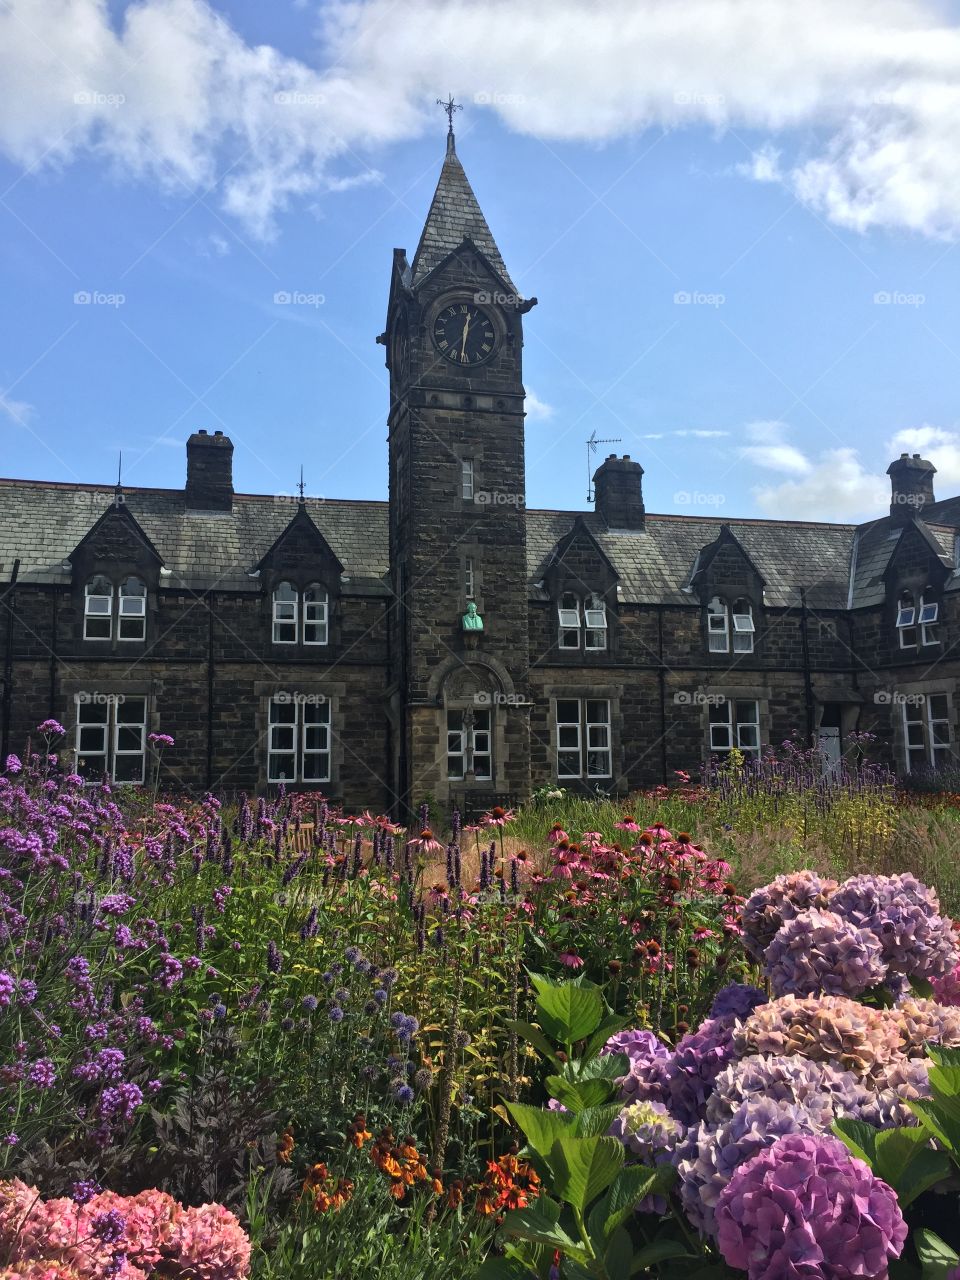 Alms Houses in Harrogate with flowers in foreground. Clock tower with bust of the founder of Alms Houses surrounded by blue sky